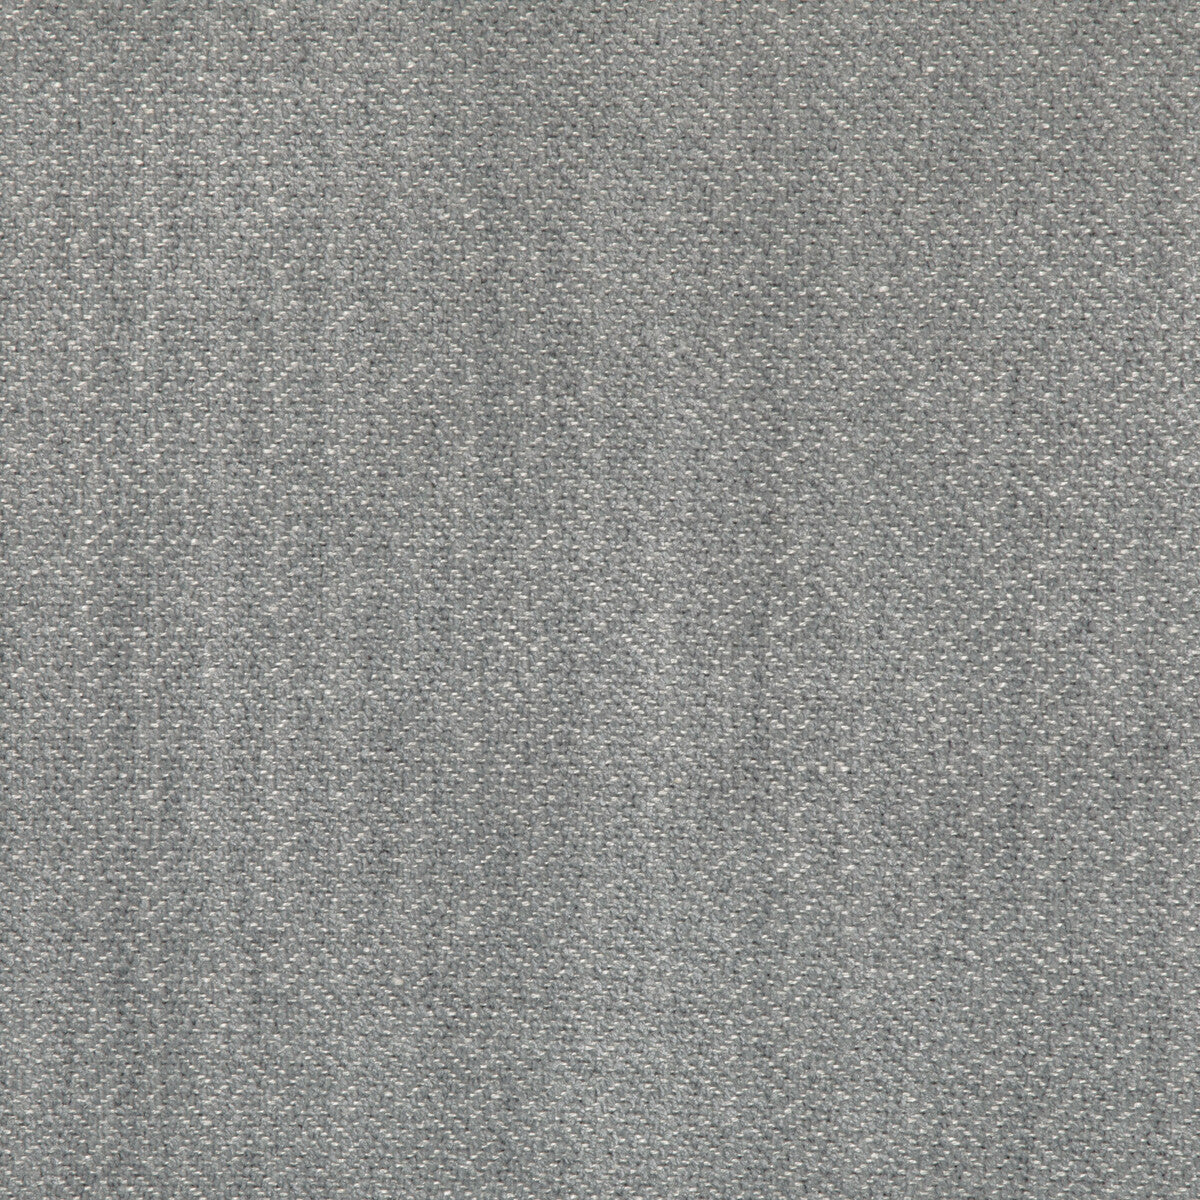 Graceful Moves fabric in slate color - pattern 36836.21.0 - by Kravet Design in the Candice Olson collection